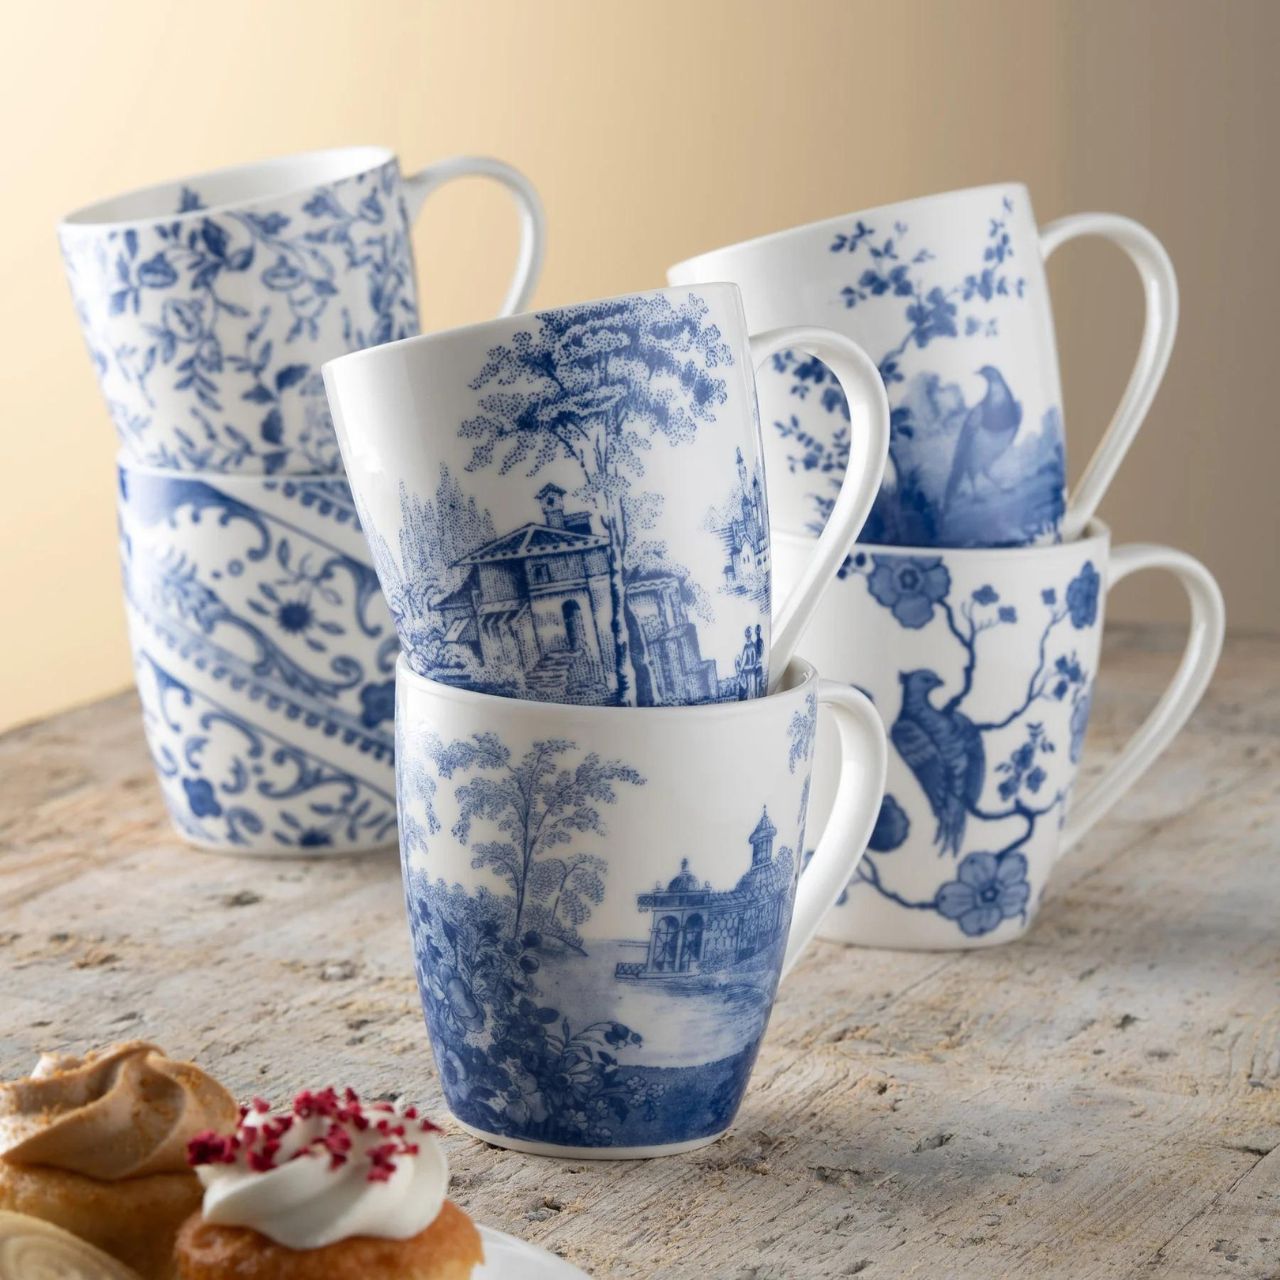 Discover "Archive Blue" by Aynsley, a tableware collection that brings over 240 years of heritage to your table. Featuring historic blue artwork from Aynsley's archives on fine china. This range reimagines tradition and combines archival artwork with contemporary elegance, offering a unique and exquisite dining experience.